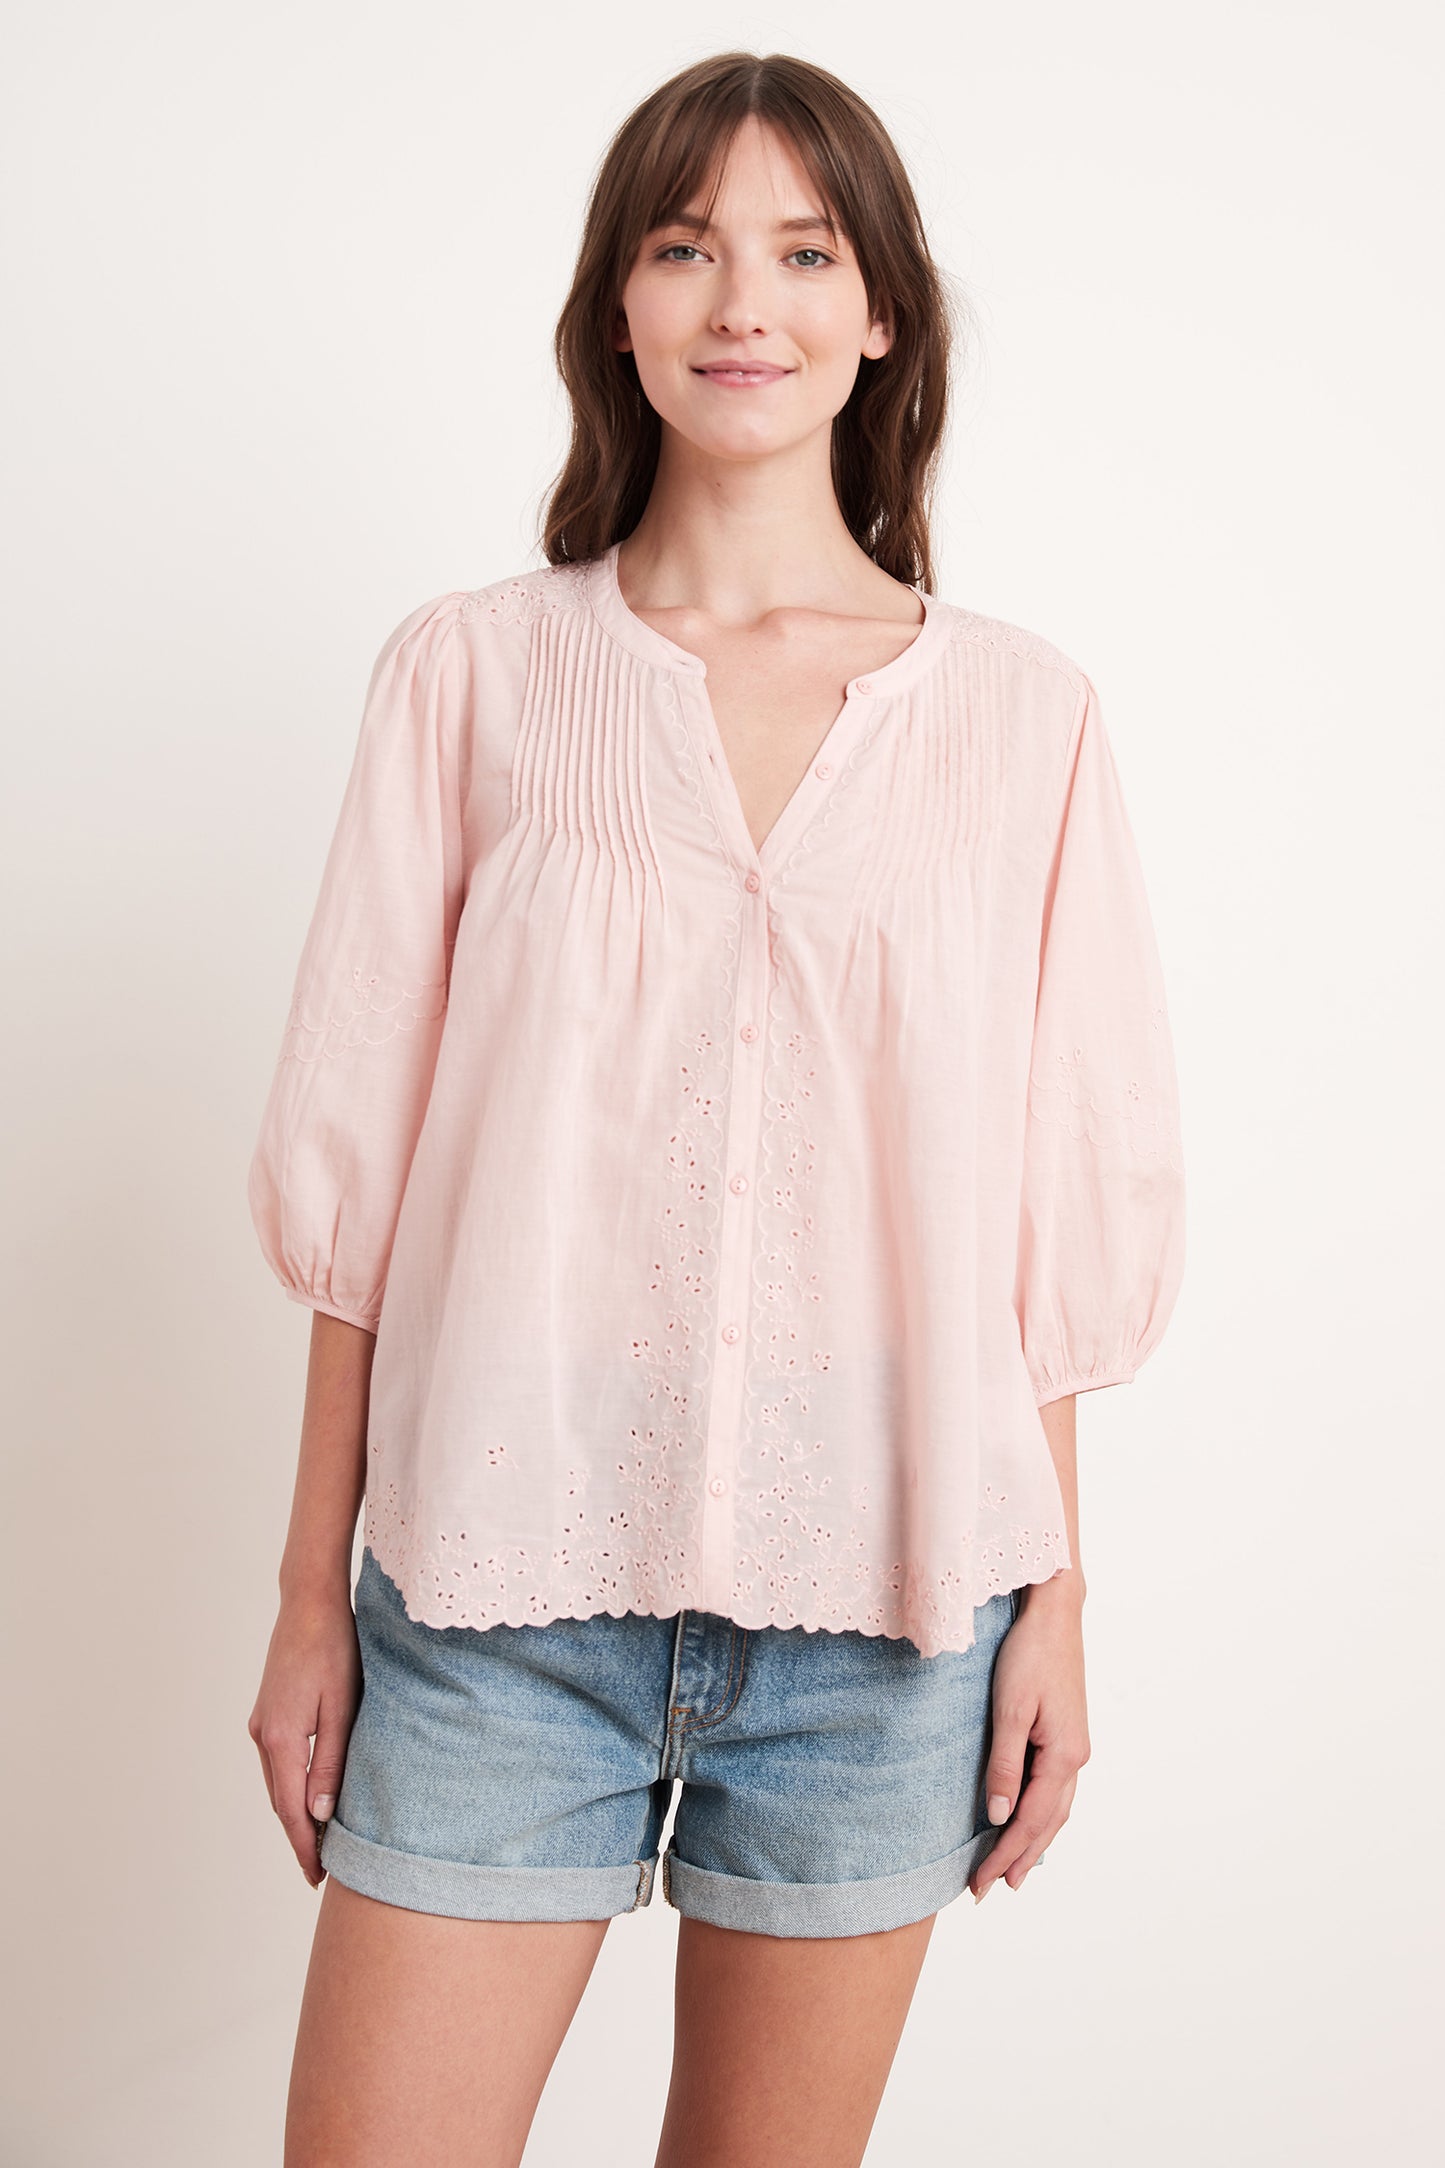 CATHERINE EYELET EMBROIDERY TOP IN DUSTYROSE